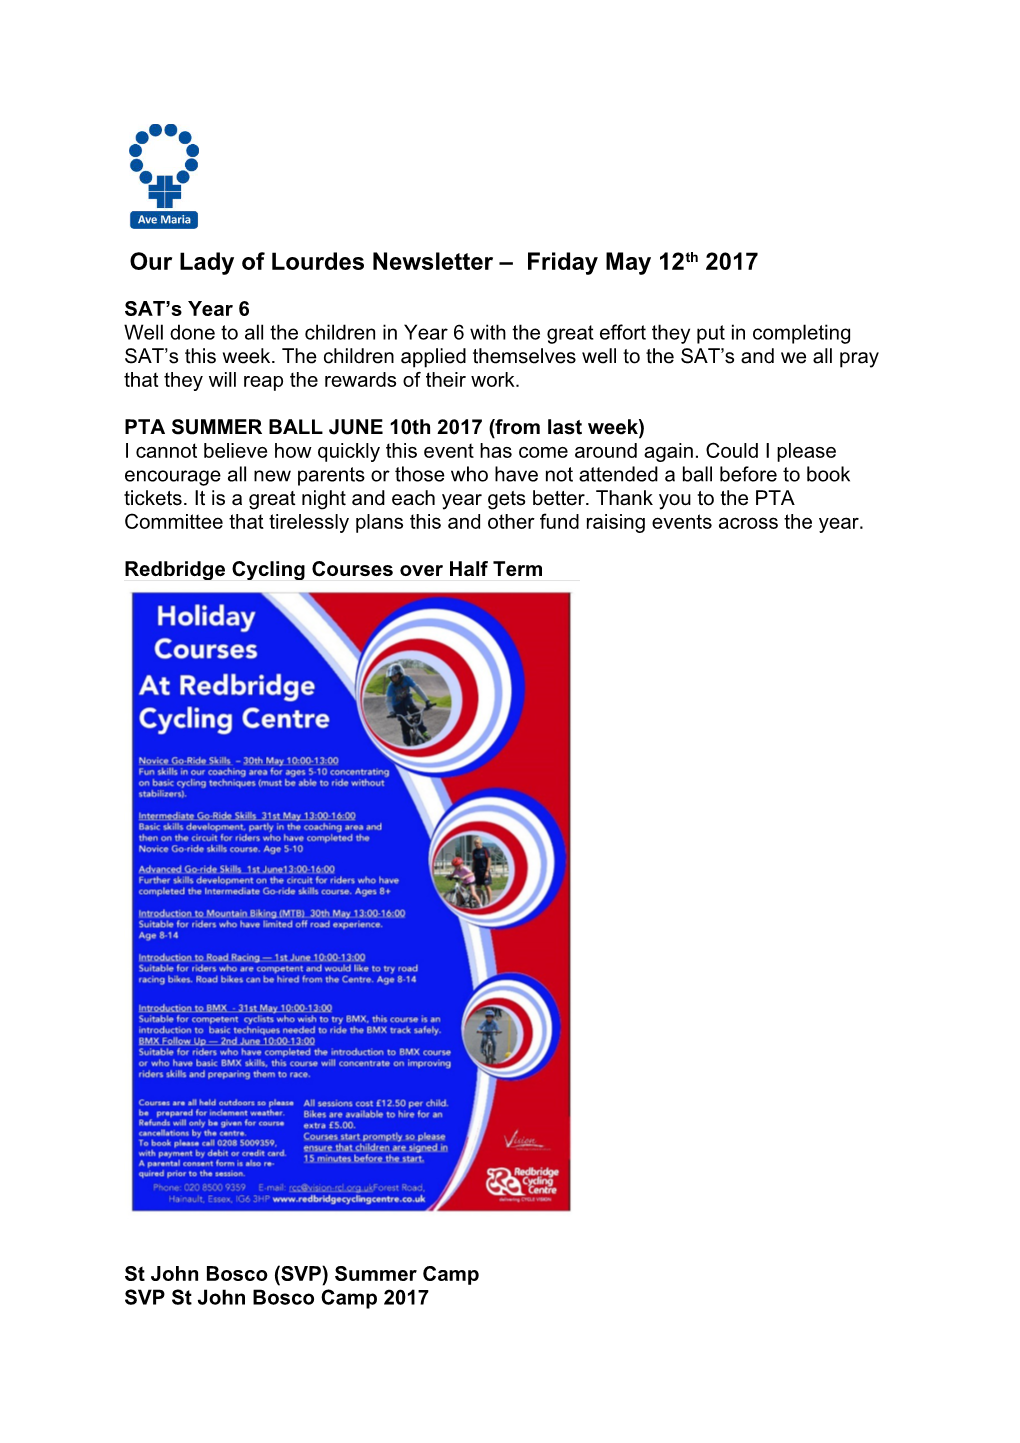 Our Lady of Lourdes Newsletter Fridaymay 12Th 2017